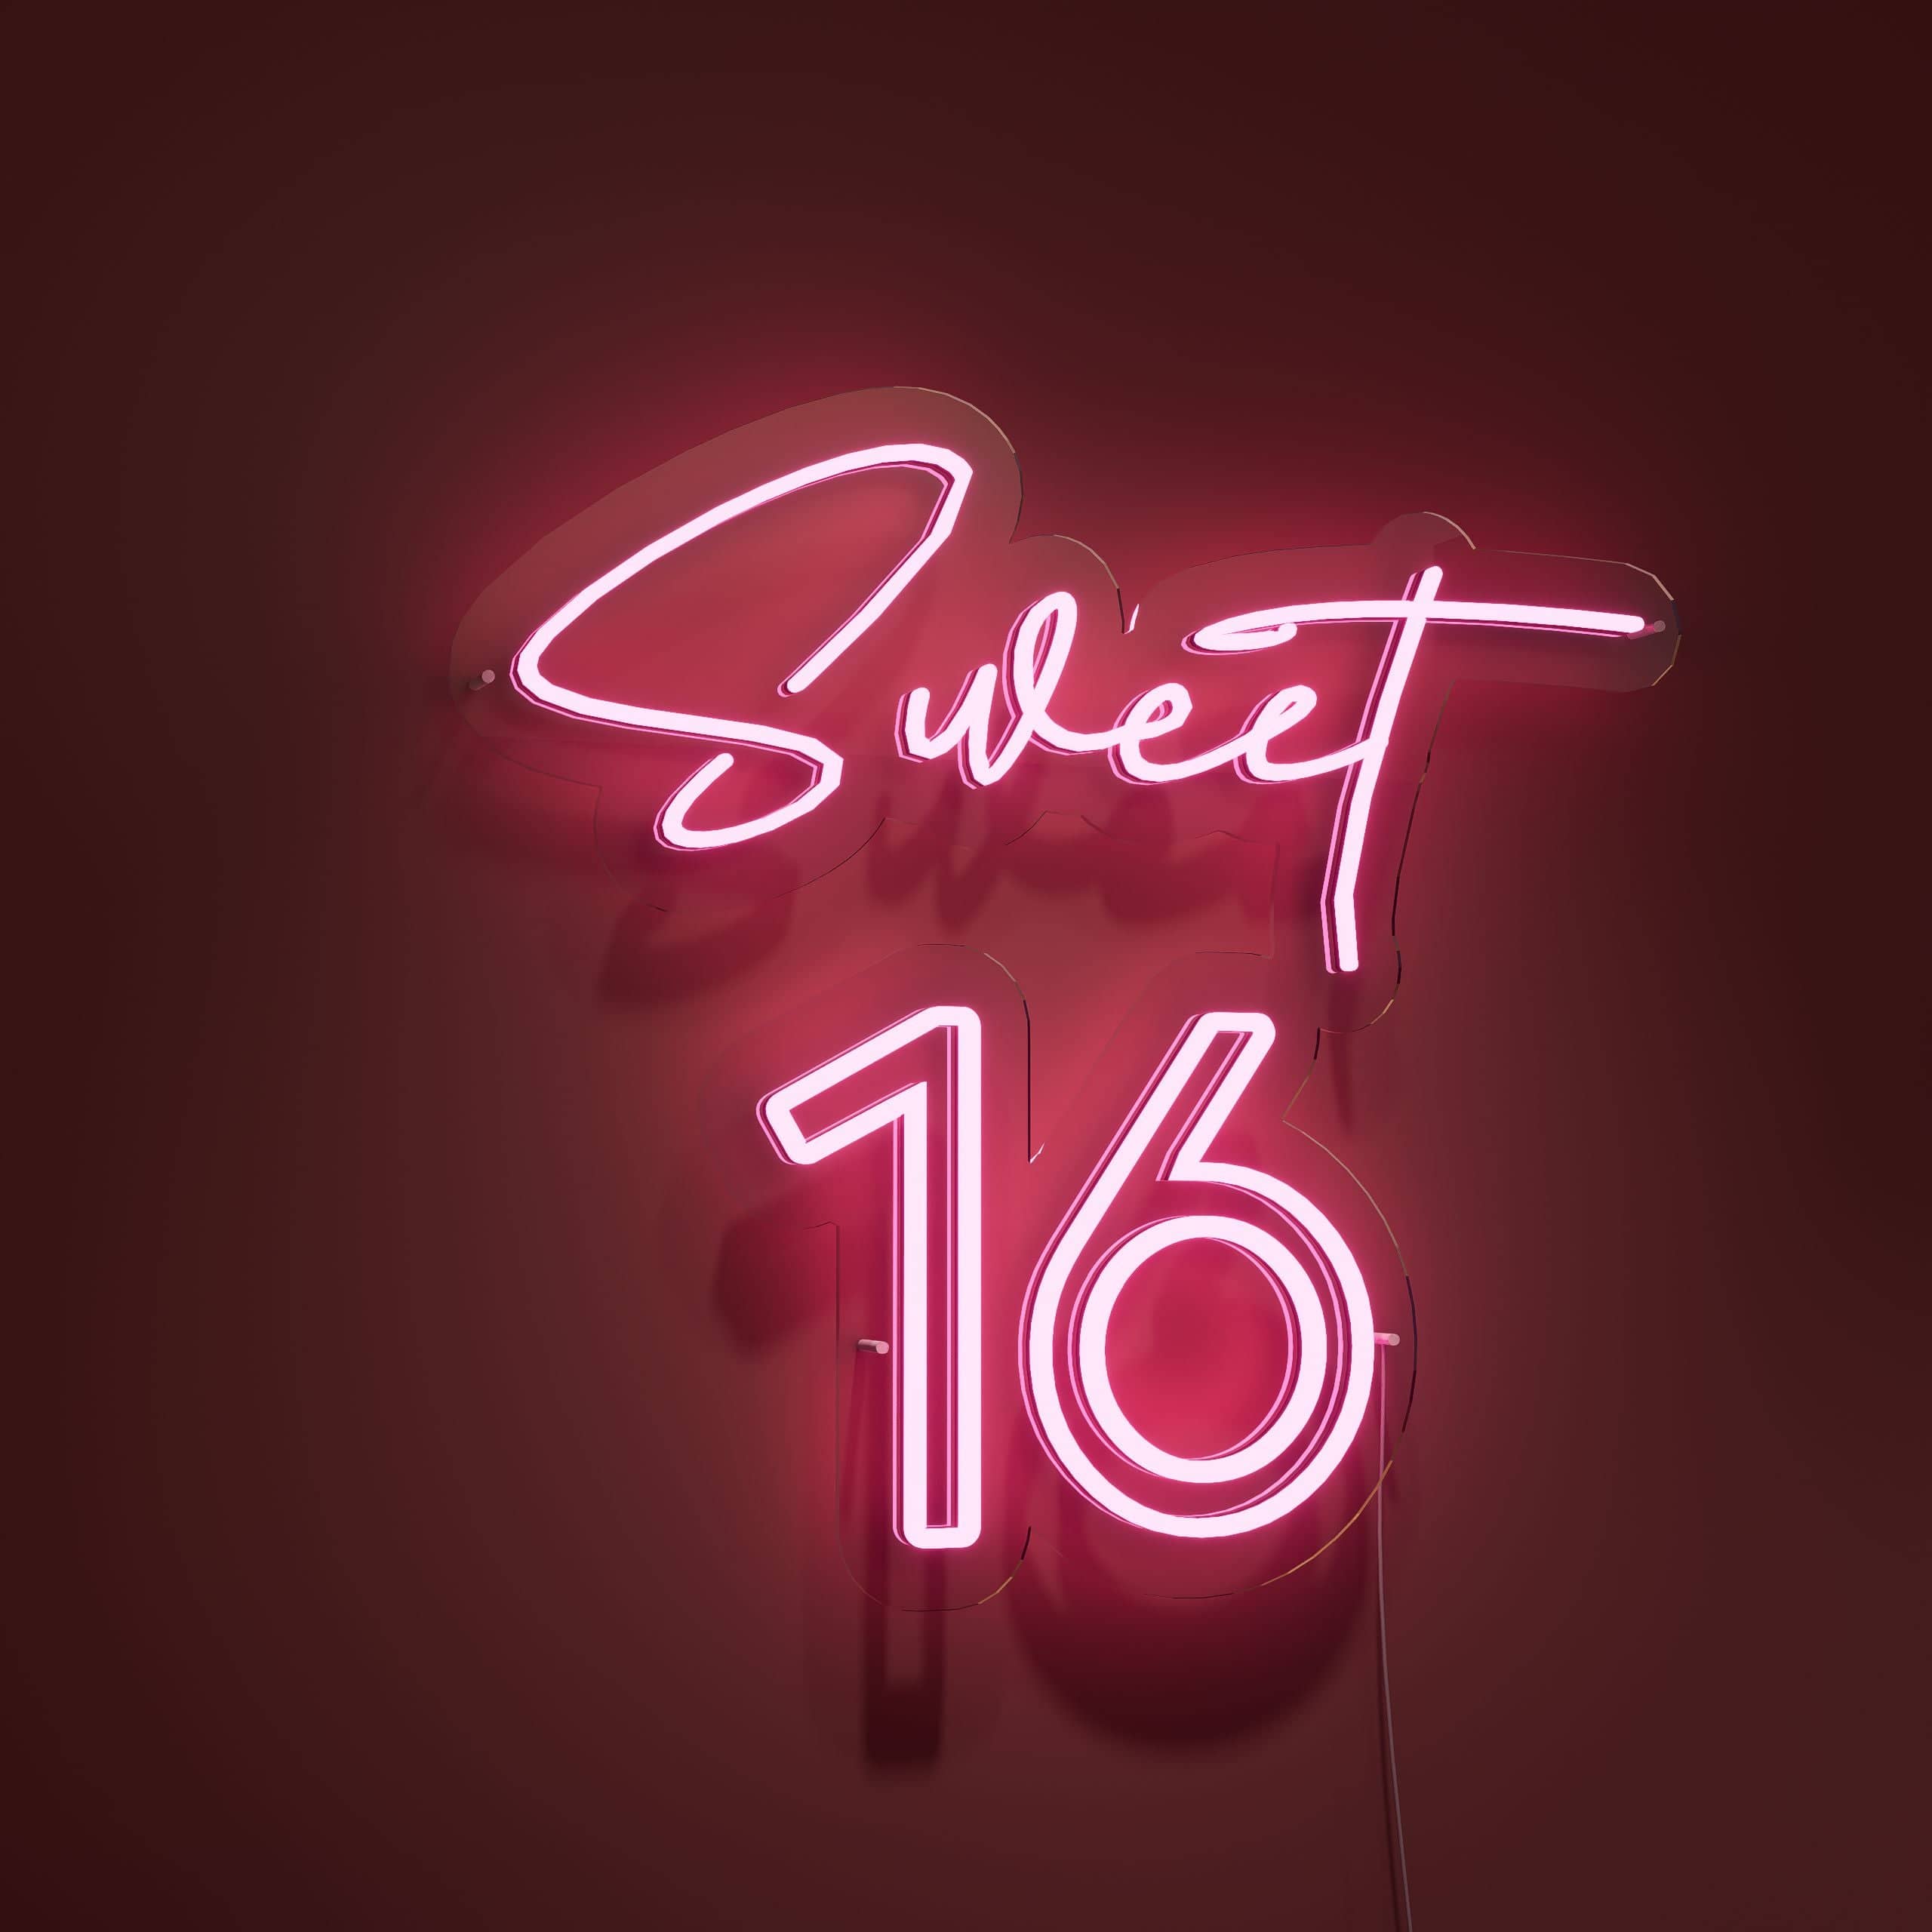 embrace-the-sweetness-of-16!-neon-sign-lite